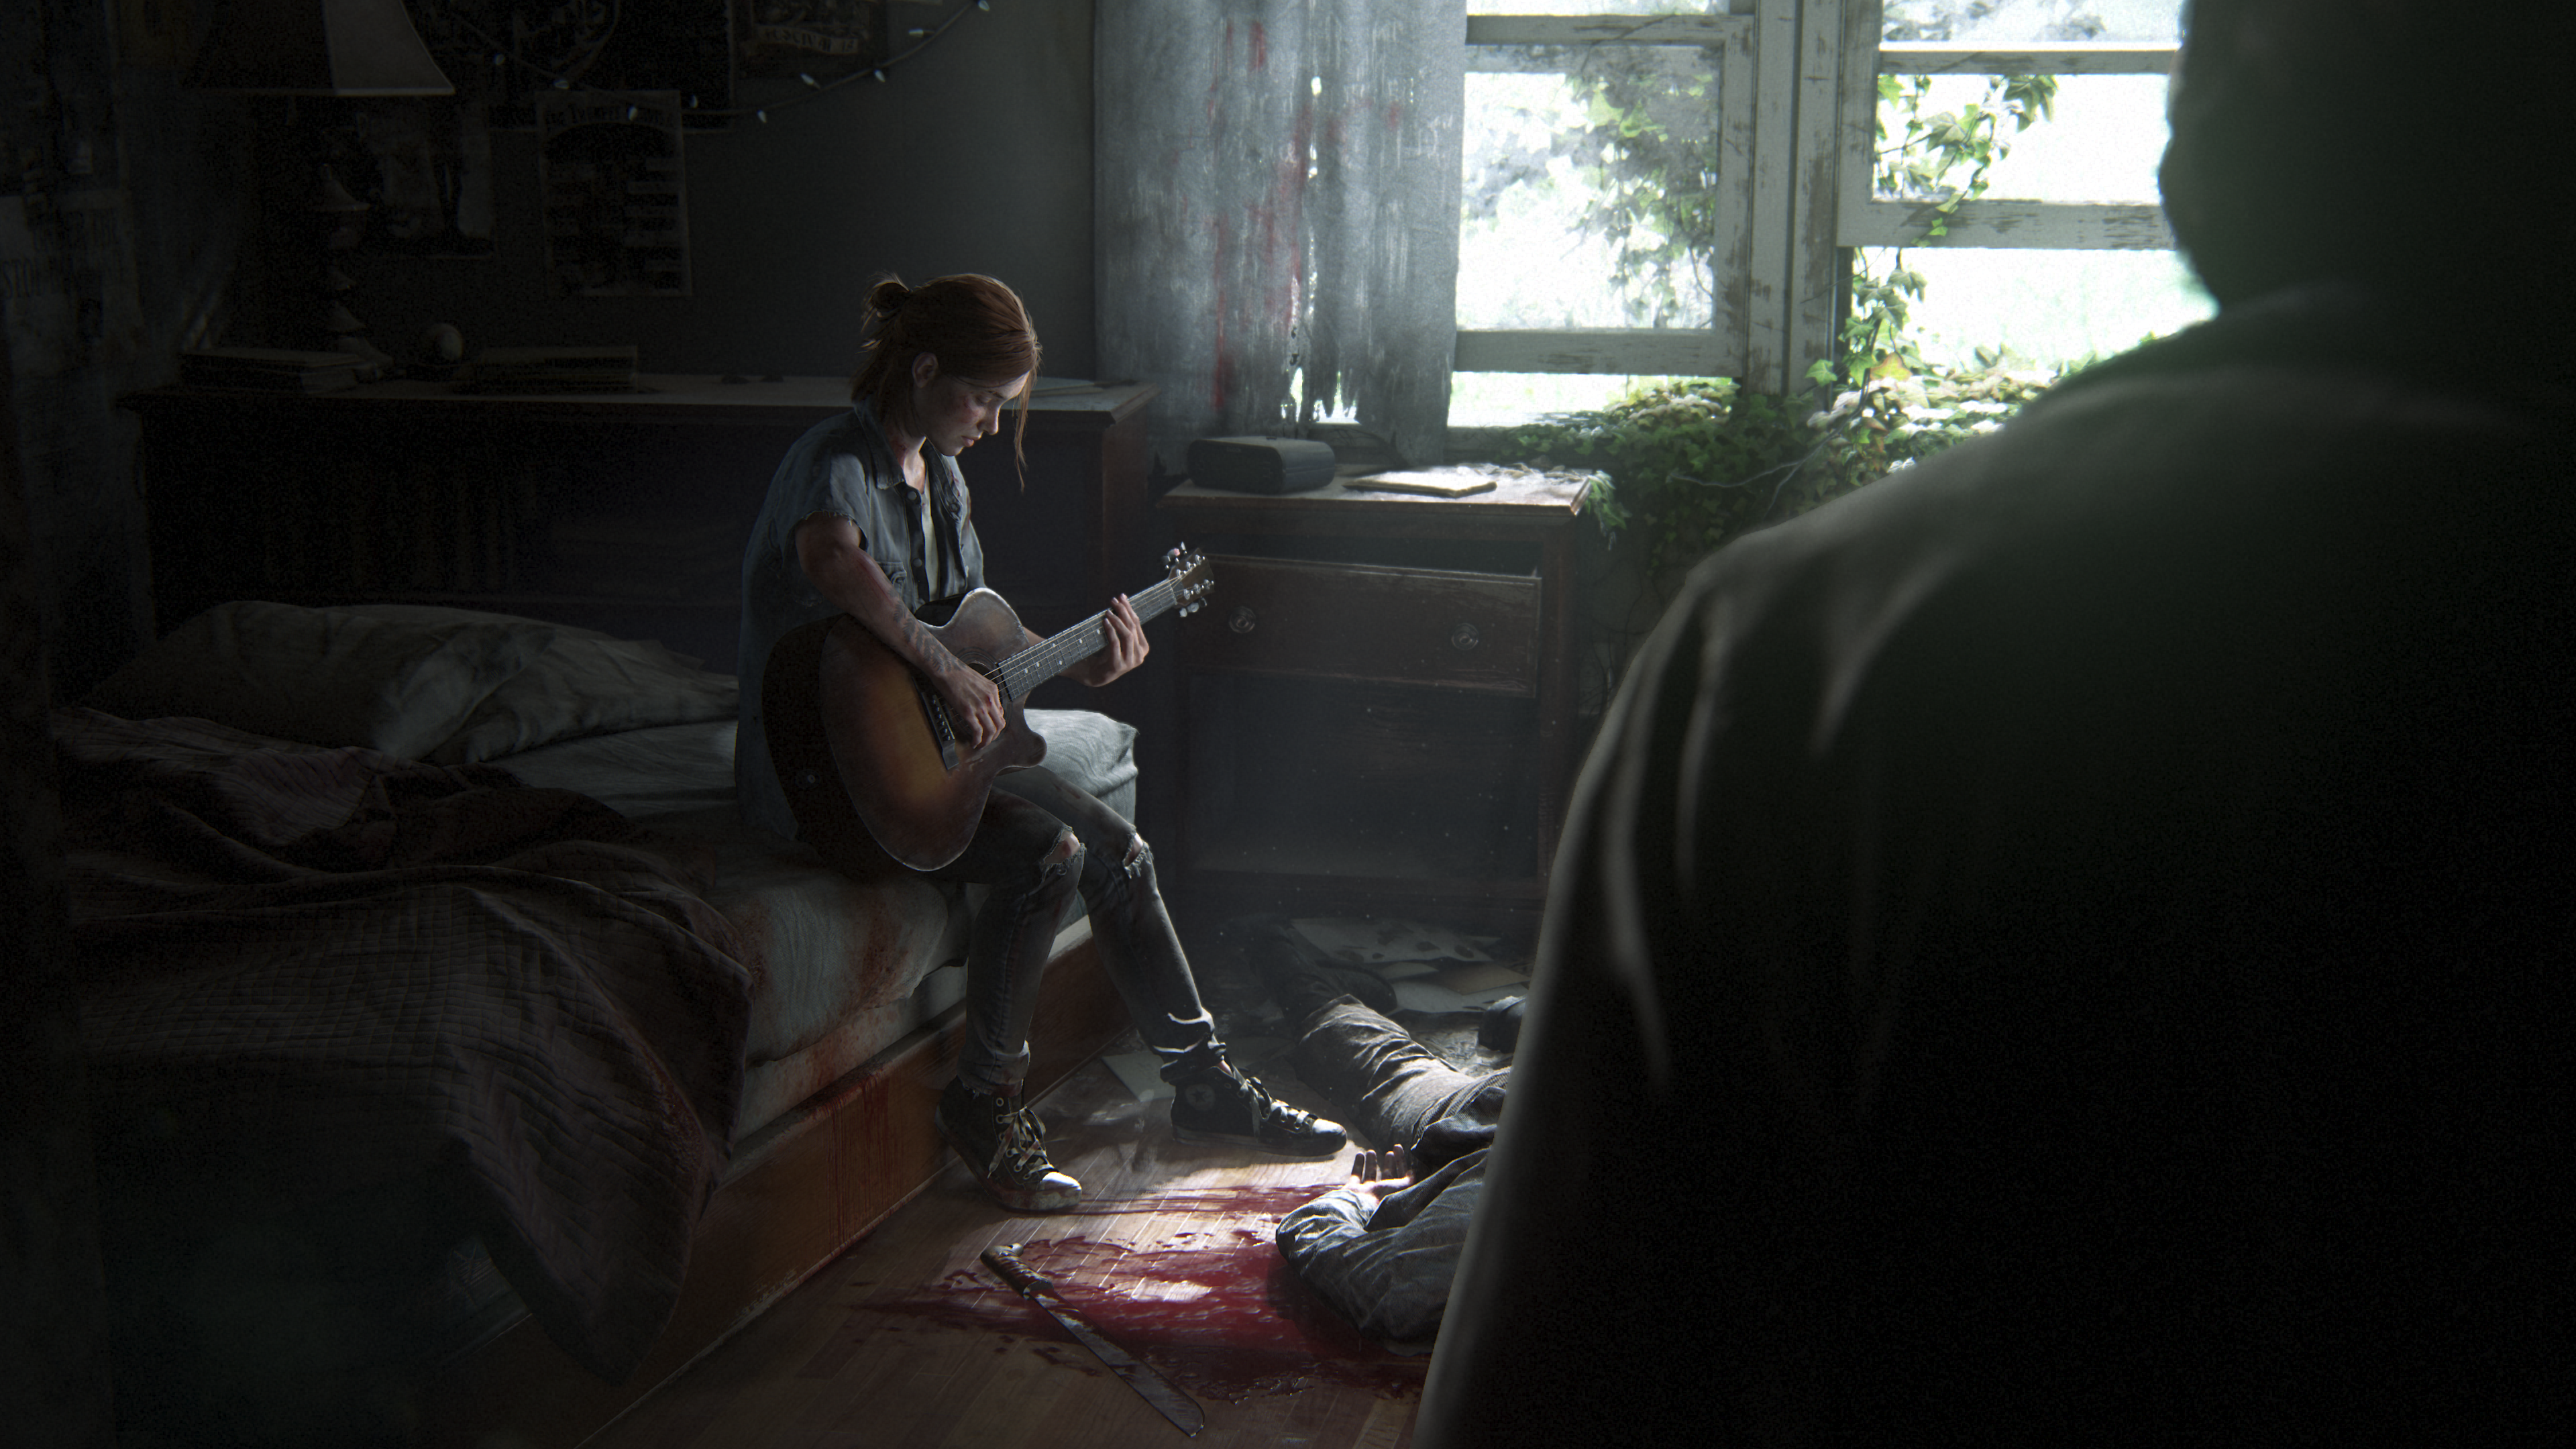 The Last Of Us 3: When Will We Get A Sequel?